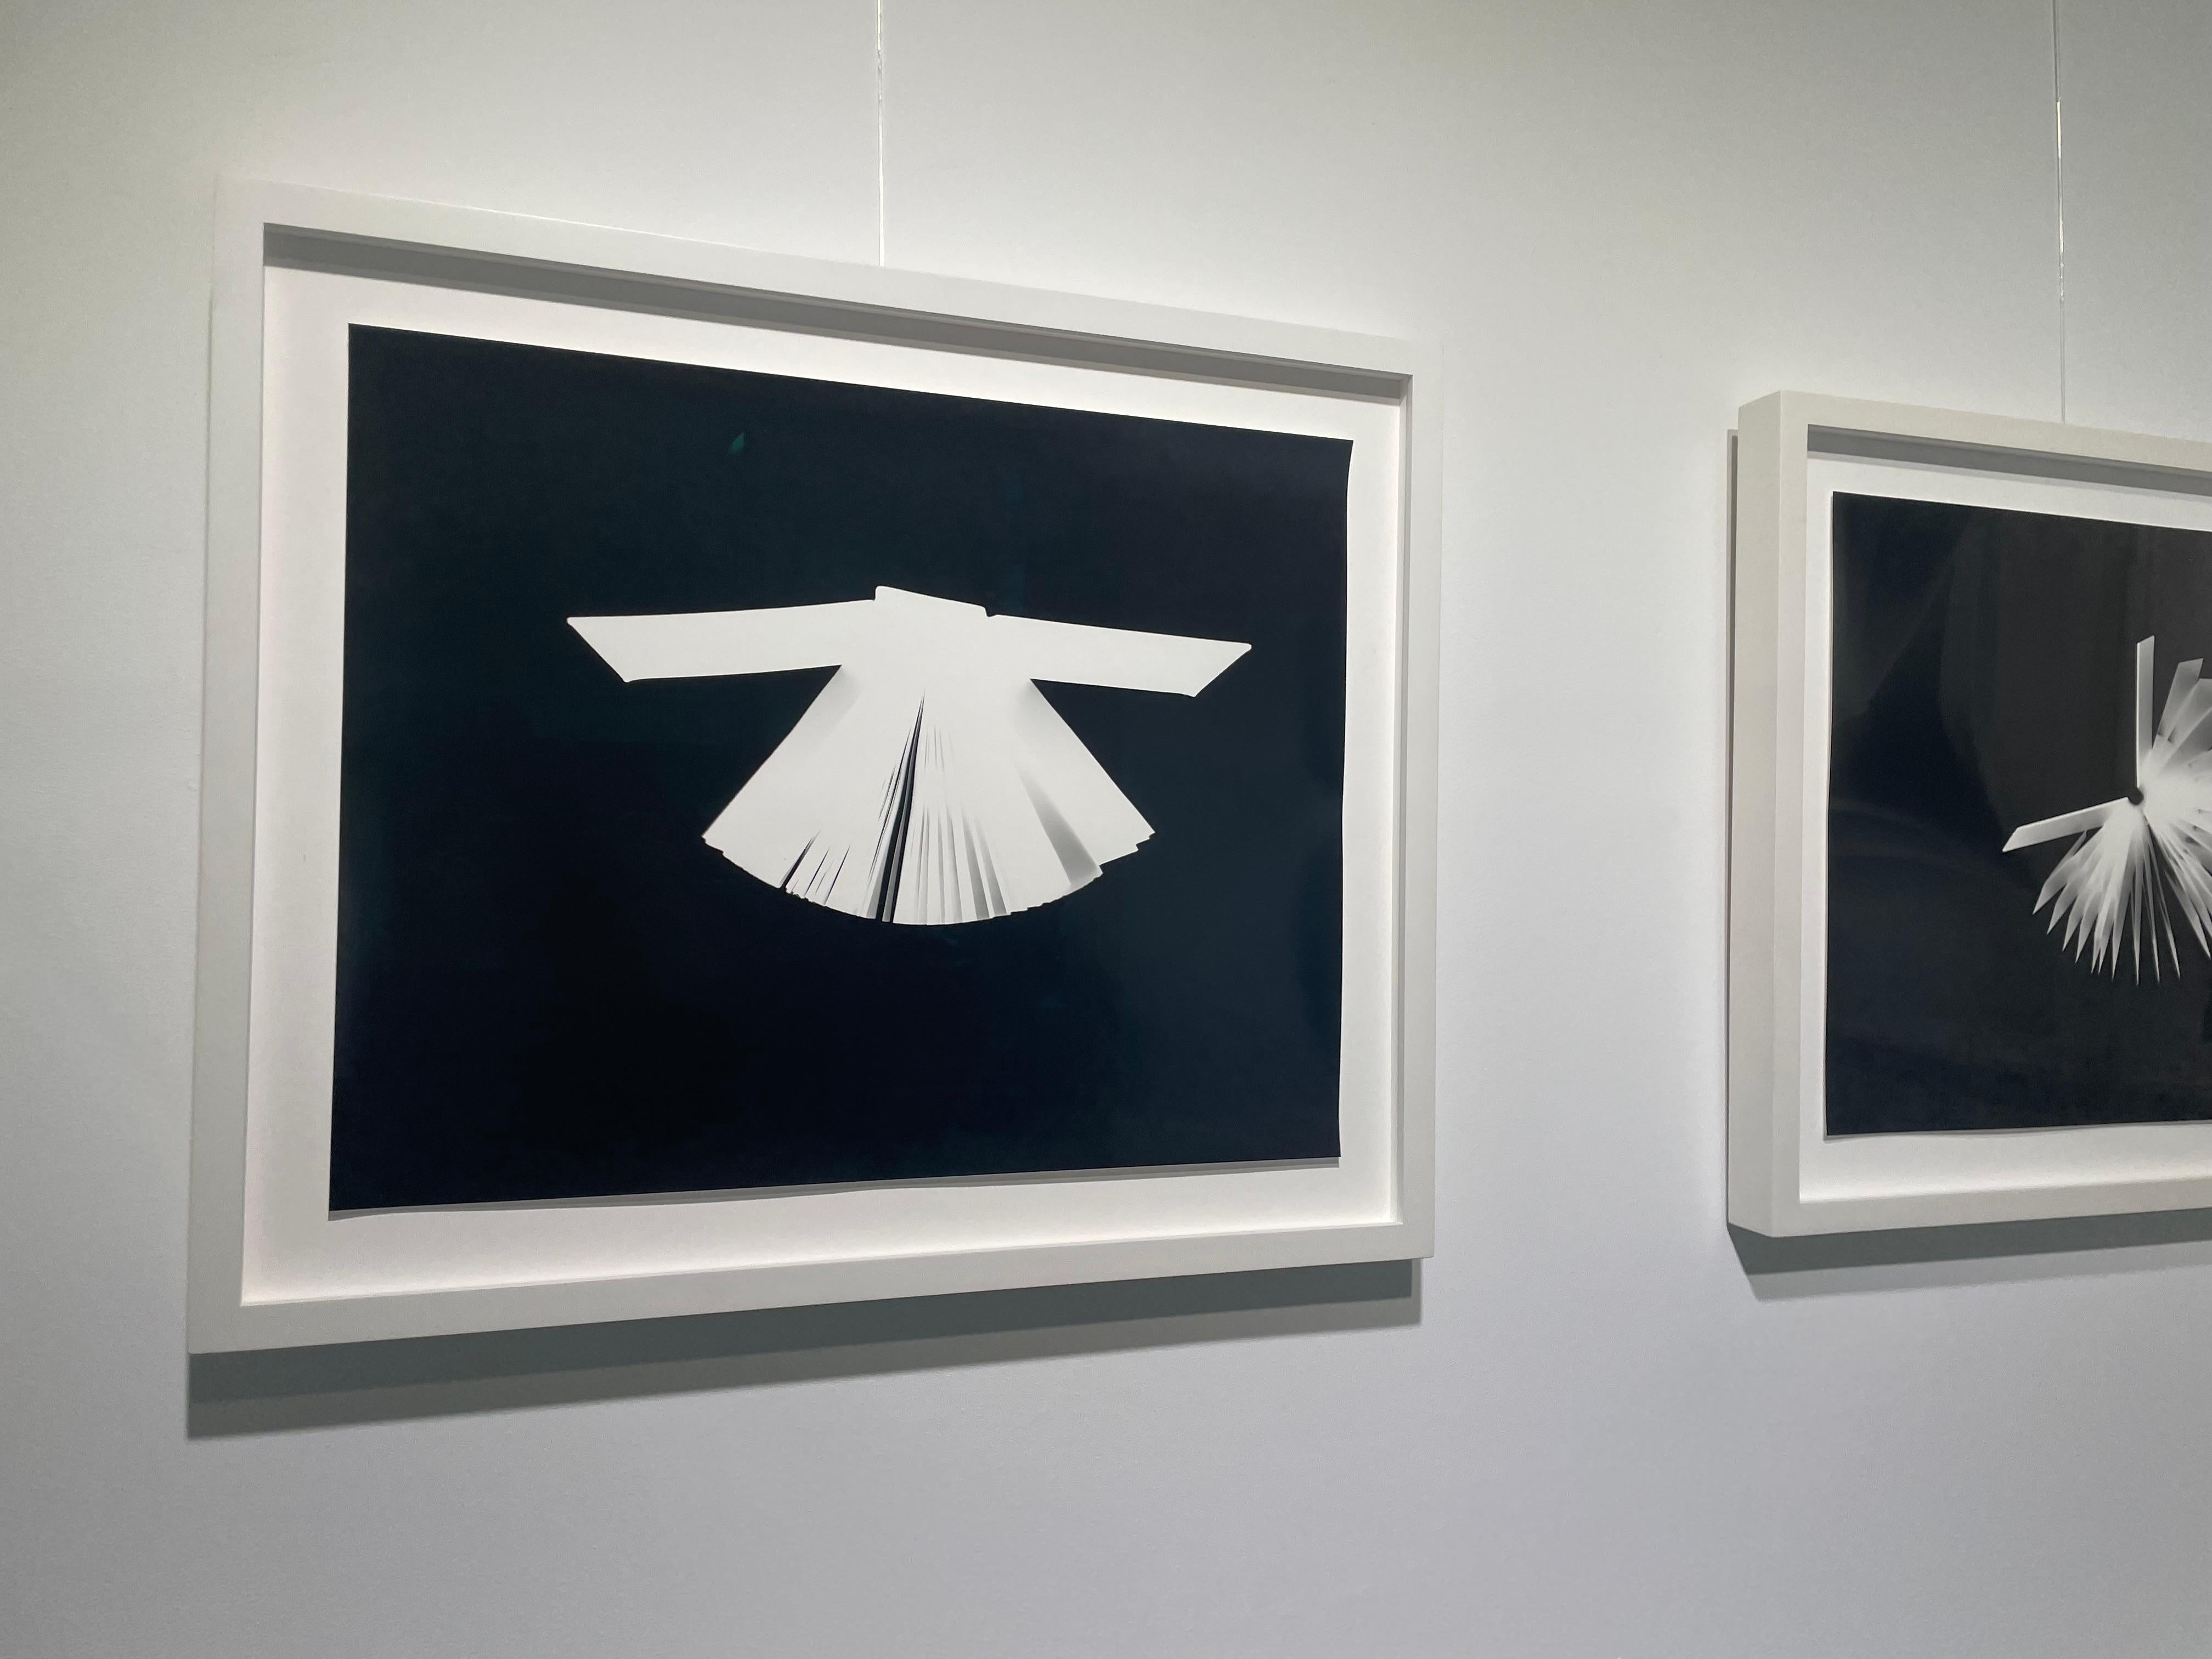 PHOTOGRAMS LITERARY UNITITLED 42 - Photograph by Wendy Paton